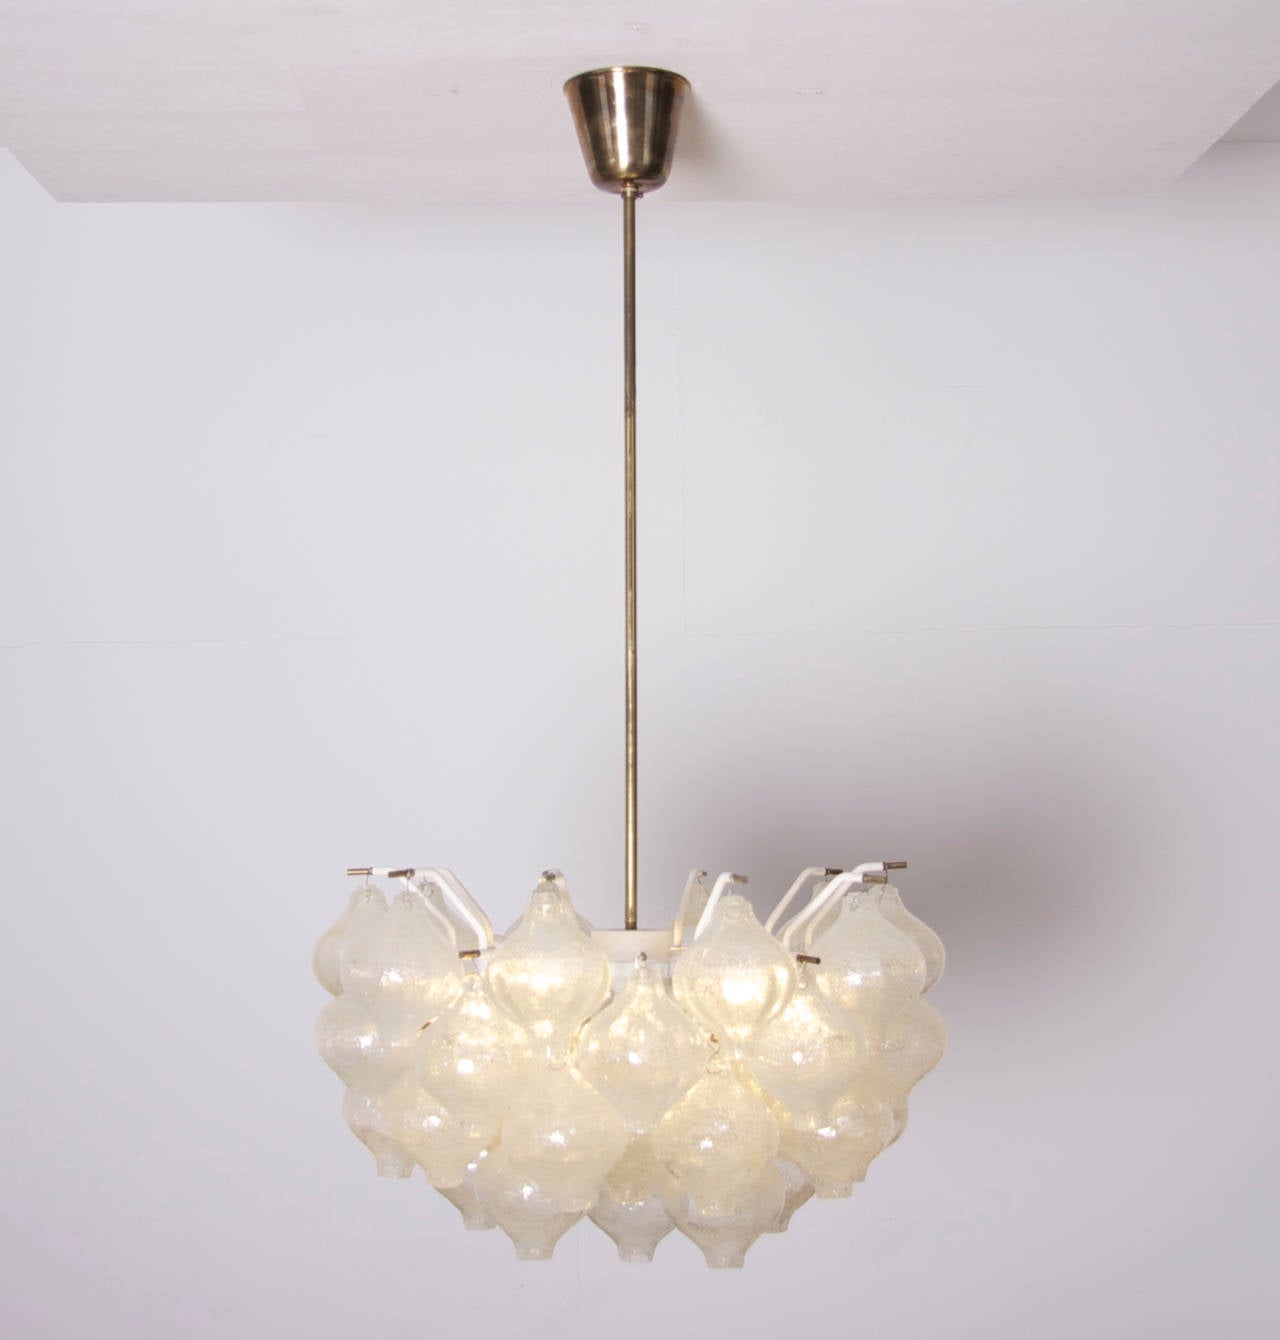 Beautiful Kalmar Tulipan chandelier in excellent condition. Height of glass part is 30 cm / 12 inch.

